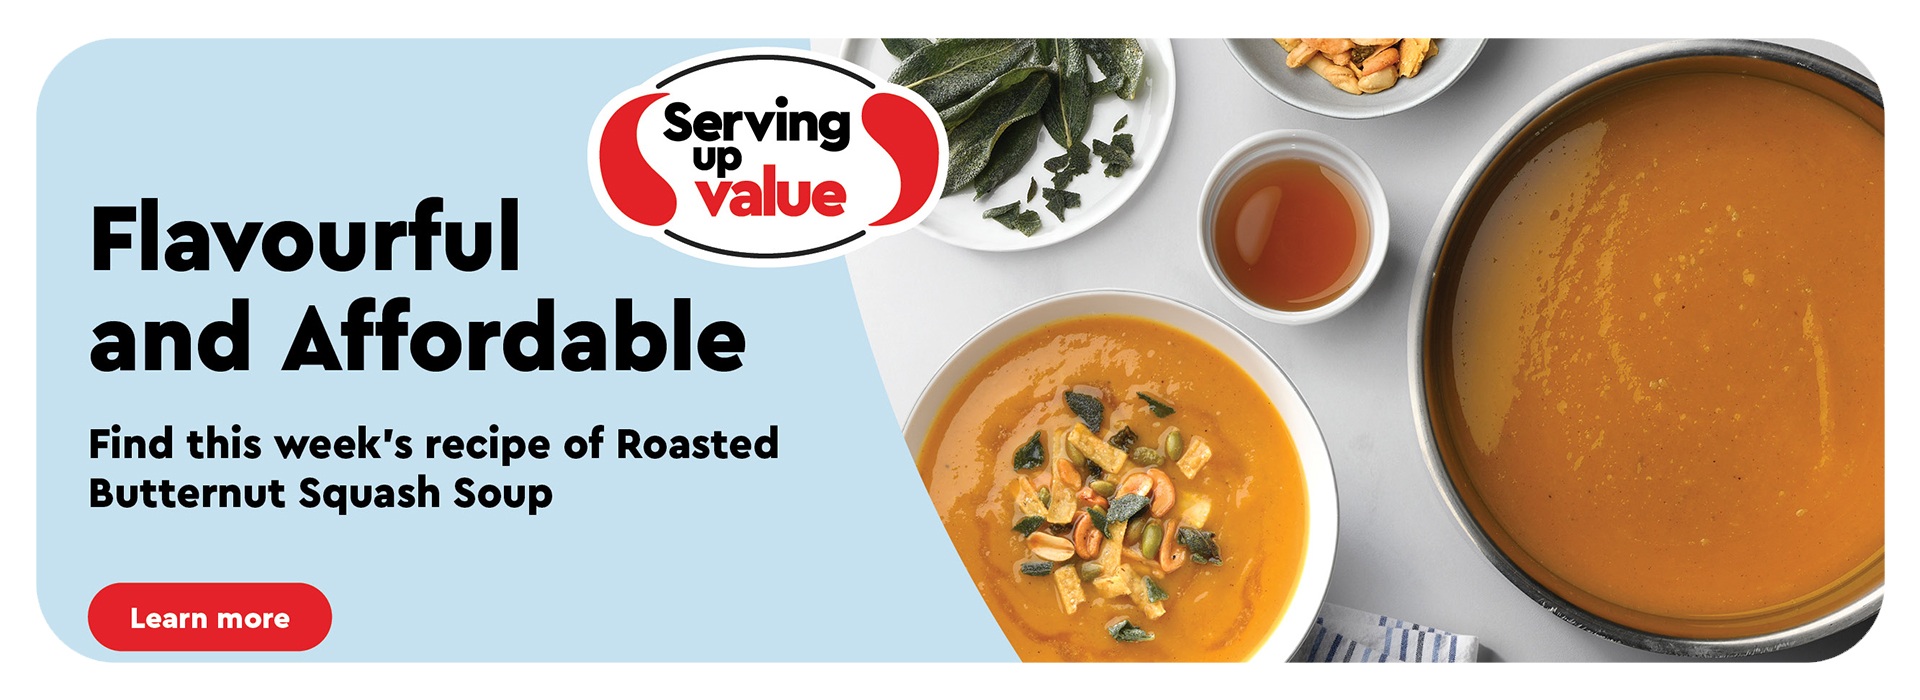 Serving up Value; Affordable and Flavourful. Find this week's recipe of Roasted Butternut Squash Soup Bowl with butternut squash soup with crouton topping. Surrounded by a large bowl with butternt squash soup, a plate with sage, a bowl with brown butter sauce, and a bowl with crouton topping.